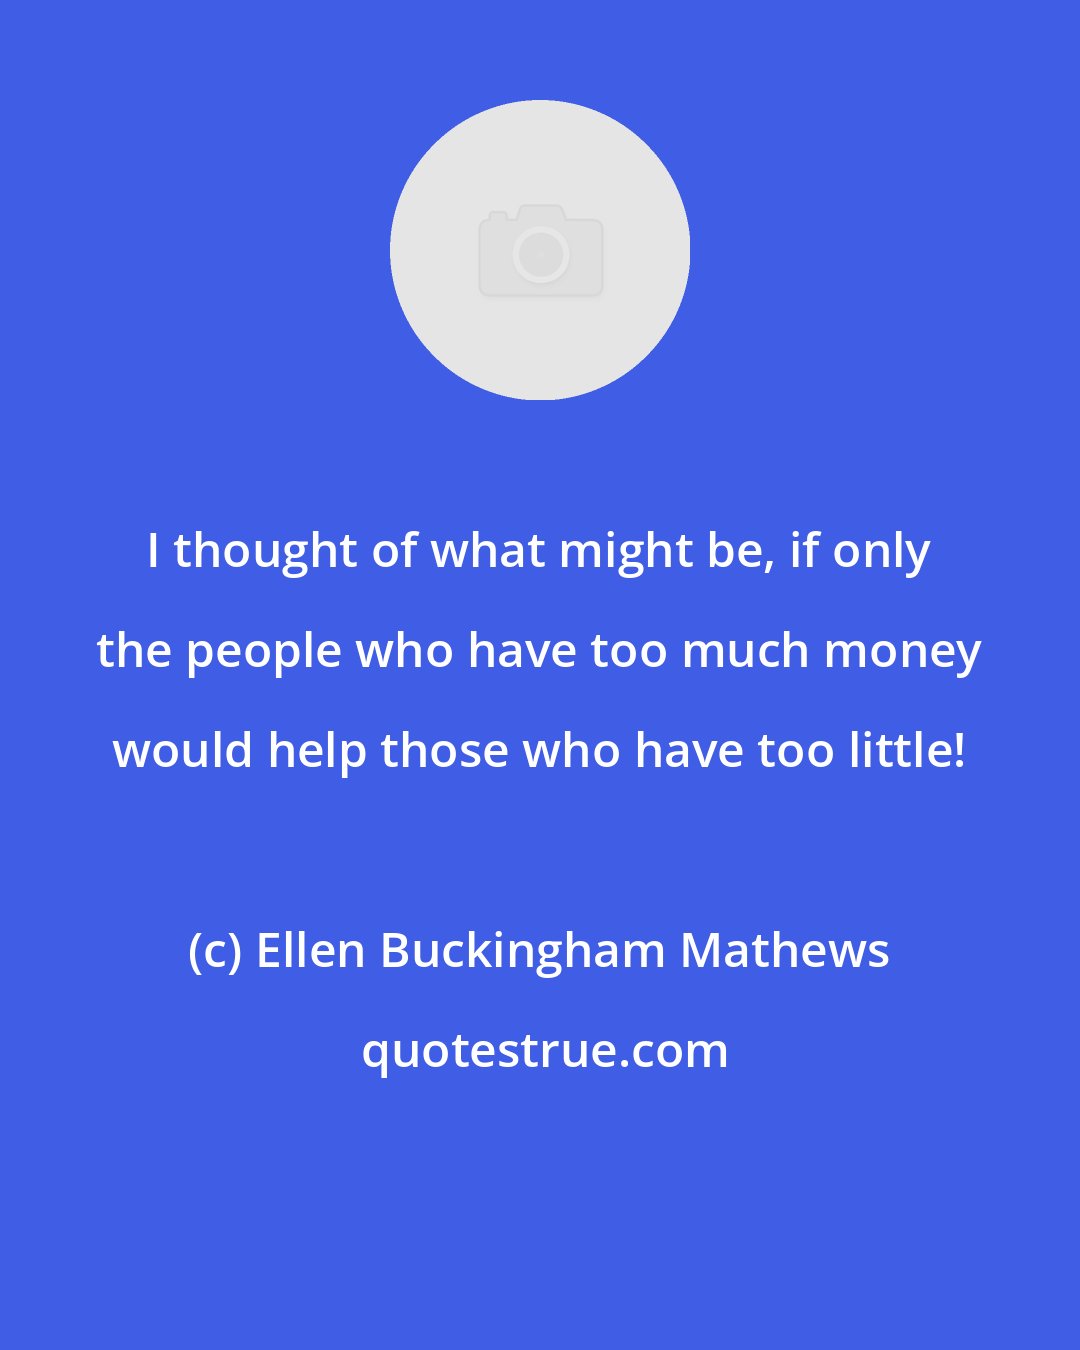 Ellen Buckingham Mathews: I thought of what might be, if only the people who have too much money would help those who have too little!